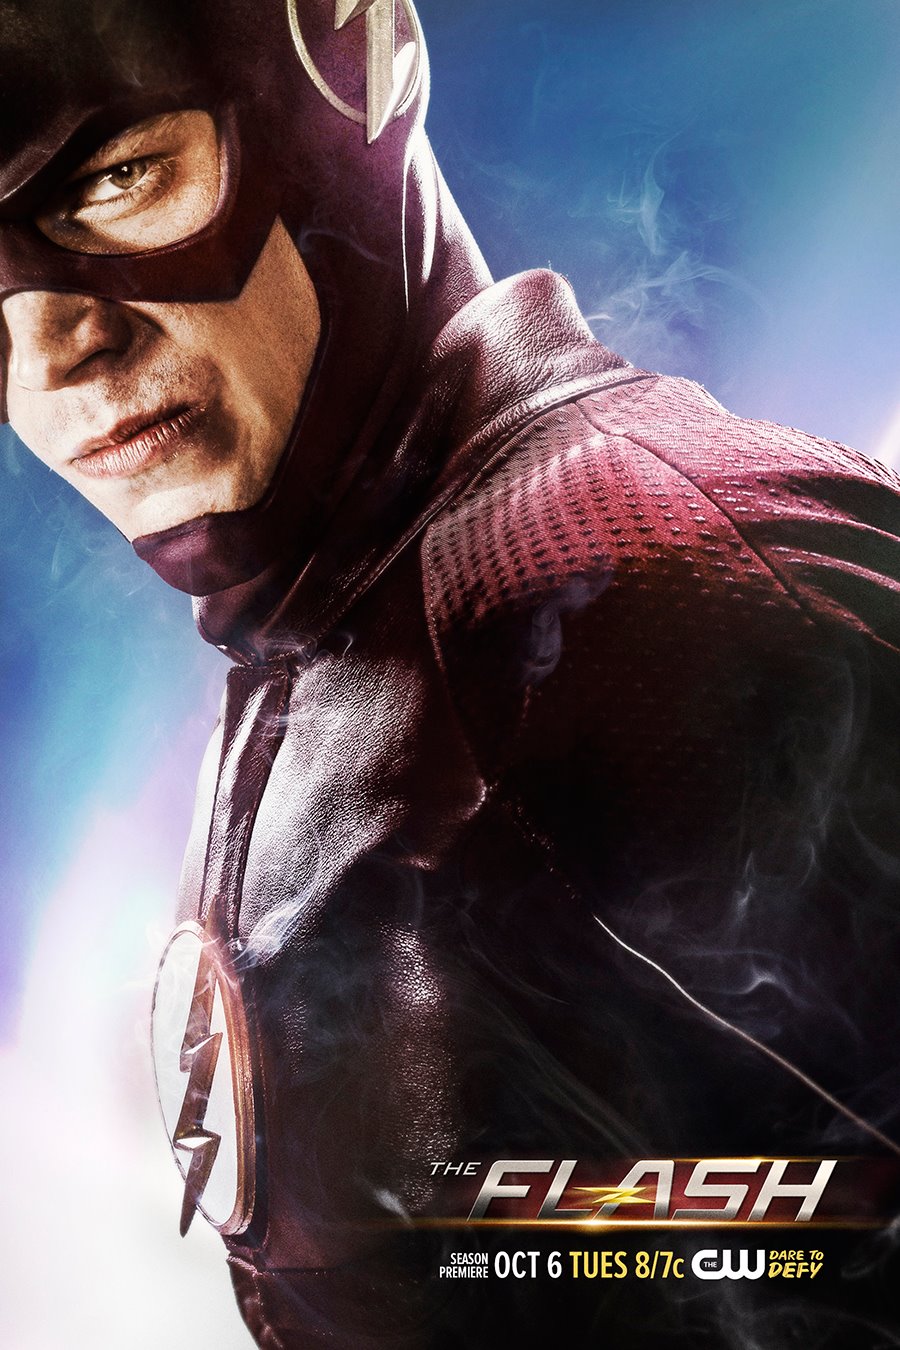 5-Minute Sneak Preview of THE FLASH Season 2 and New Poster — GeekTyrant